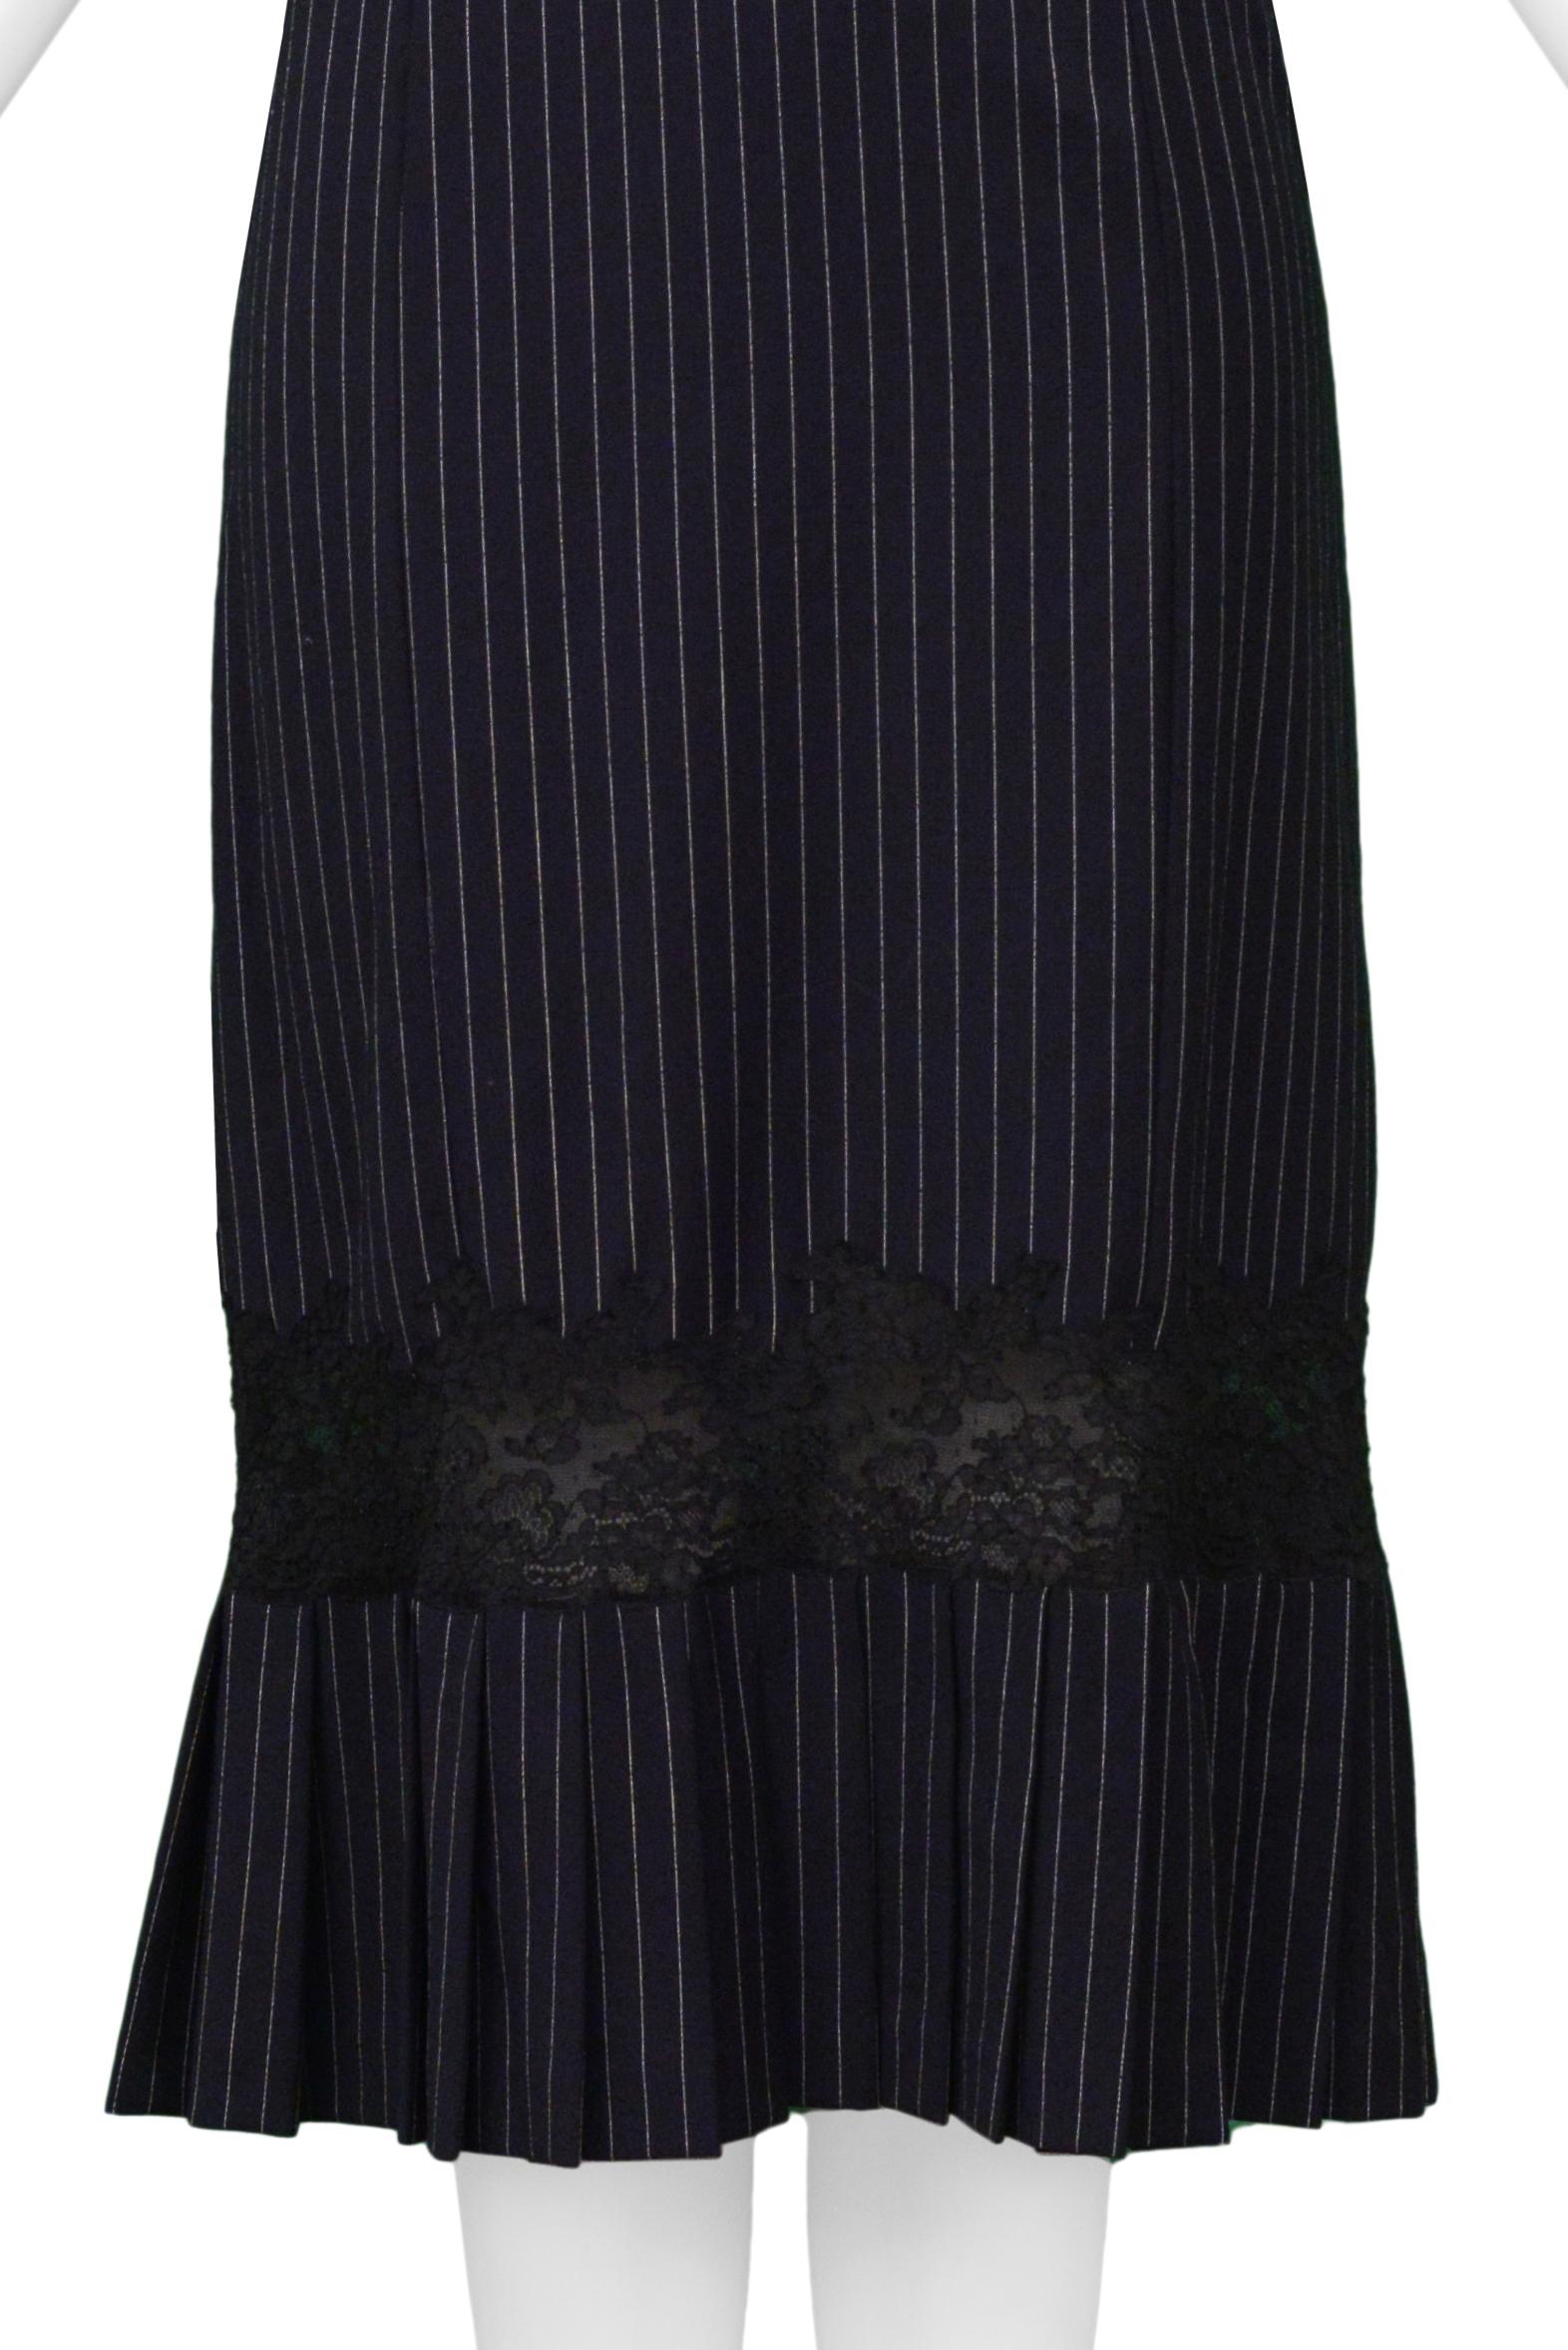 Black John Galliano Navy Pinstripe Dress With Lace Inset For Sale